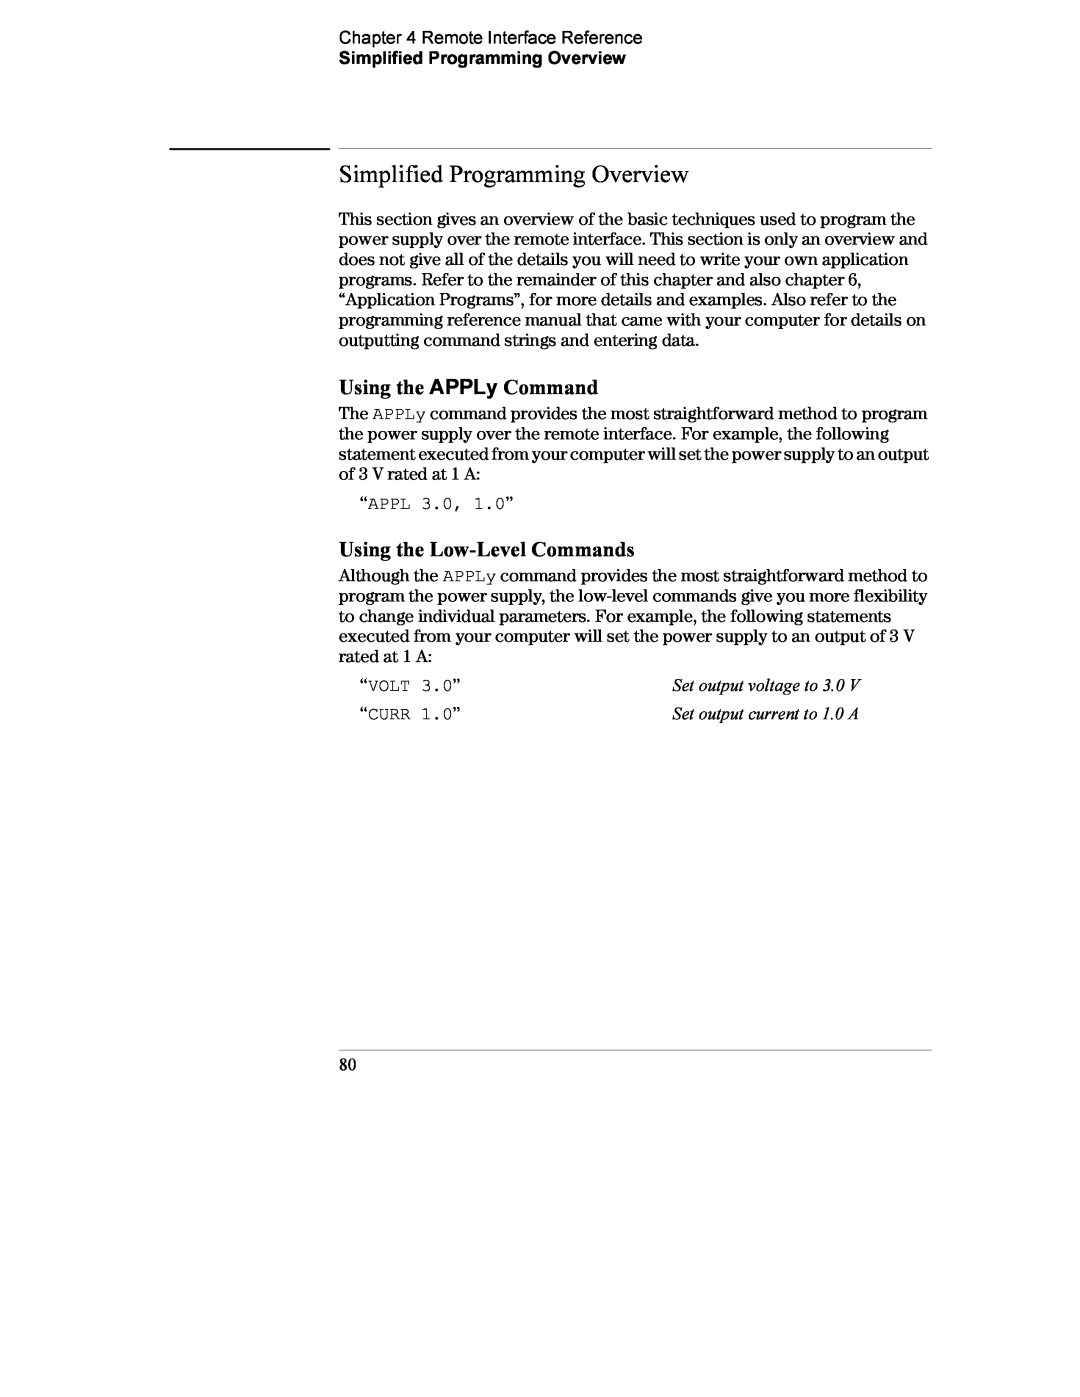 Agilent Technologies E3634A, E3633A Simplified Programming Overview, Using the APPLy Command, Using the Low-Level Commands 